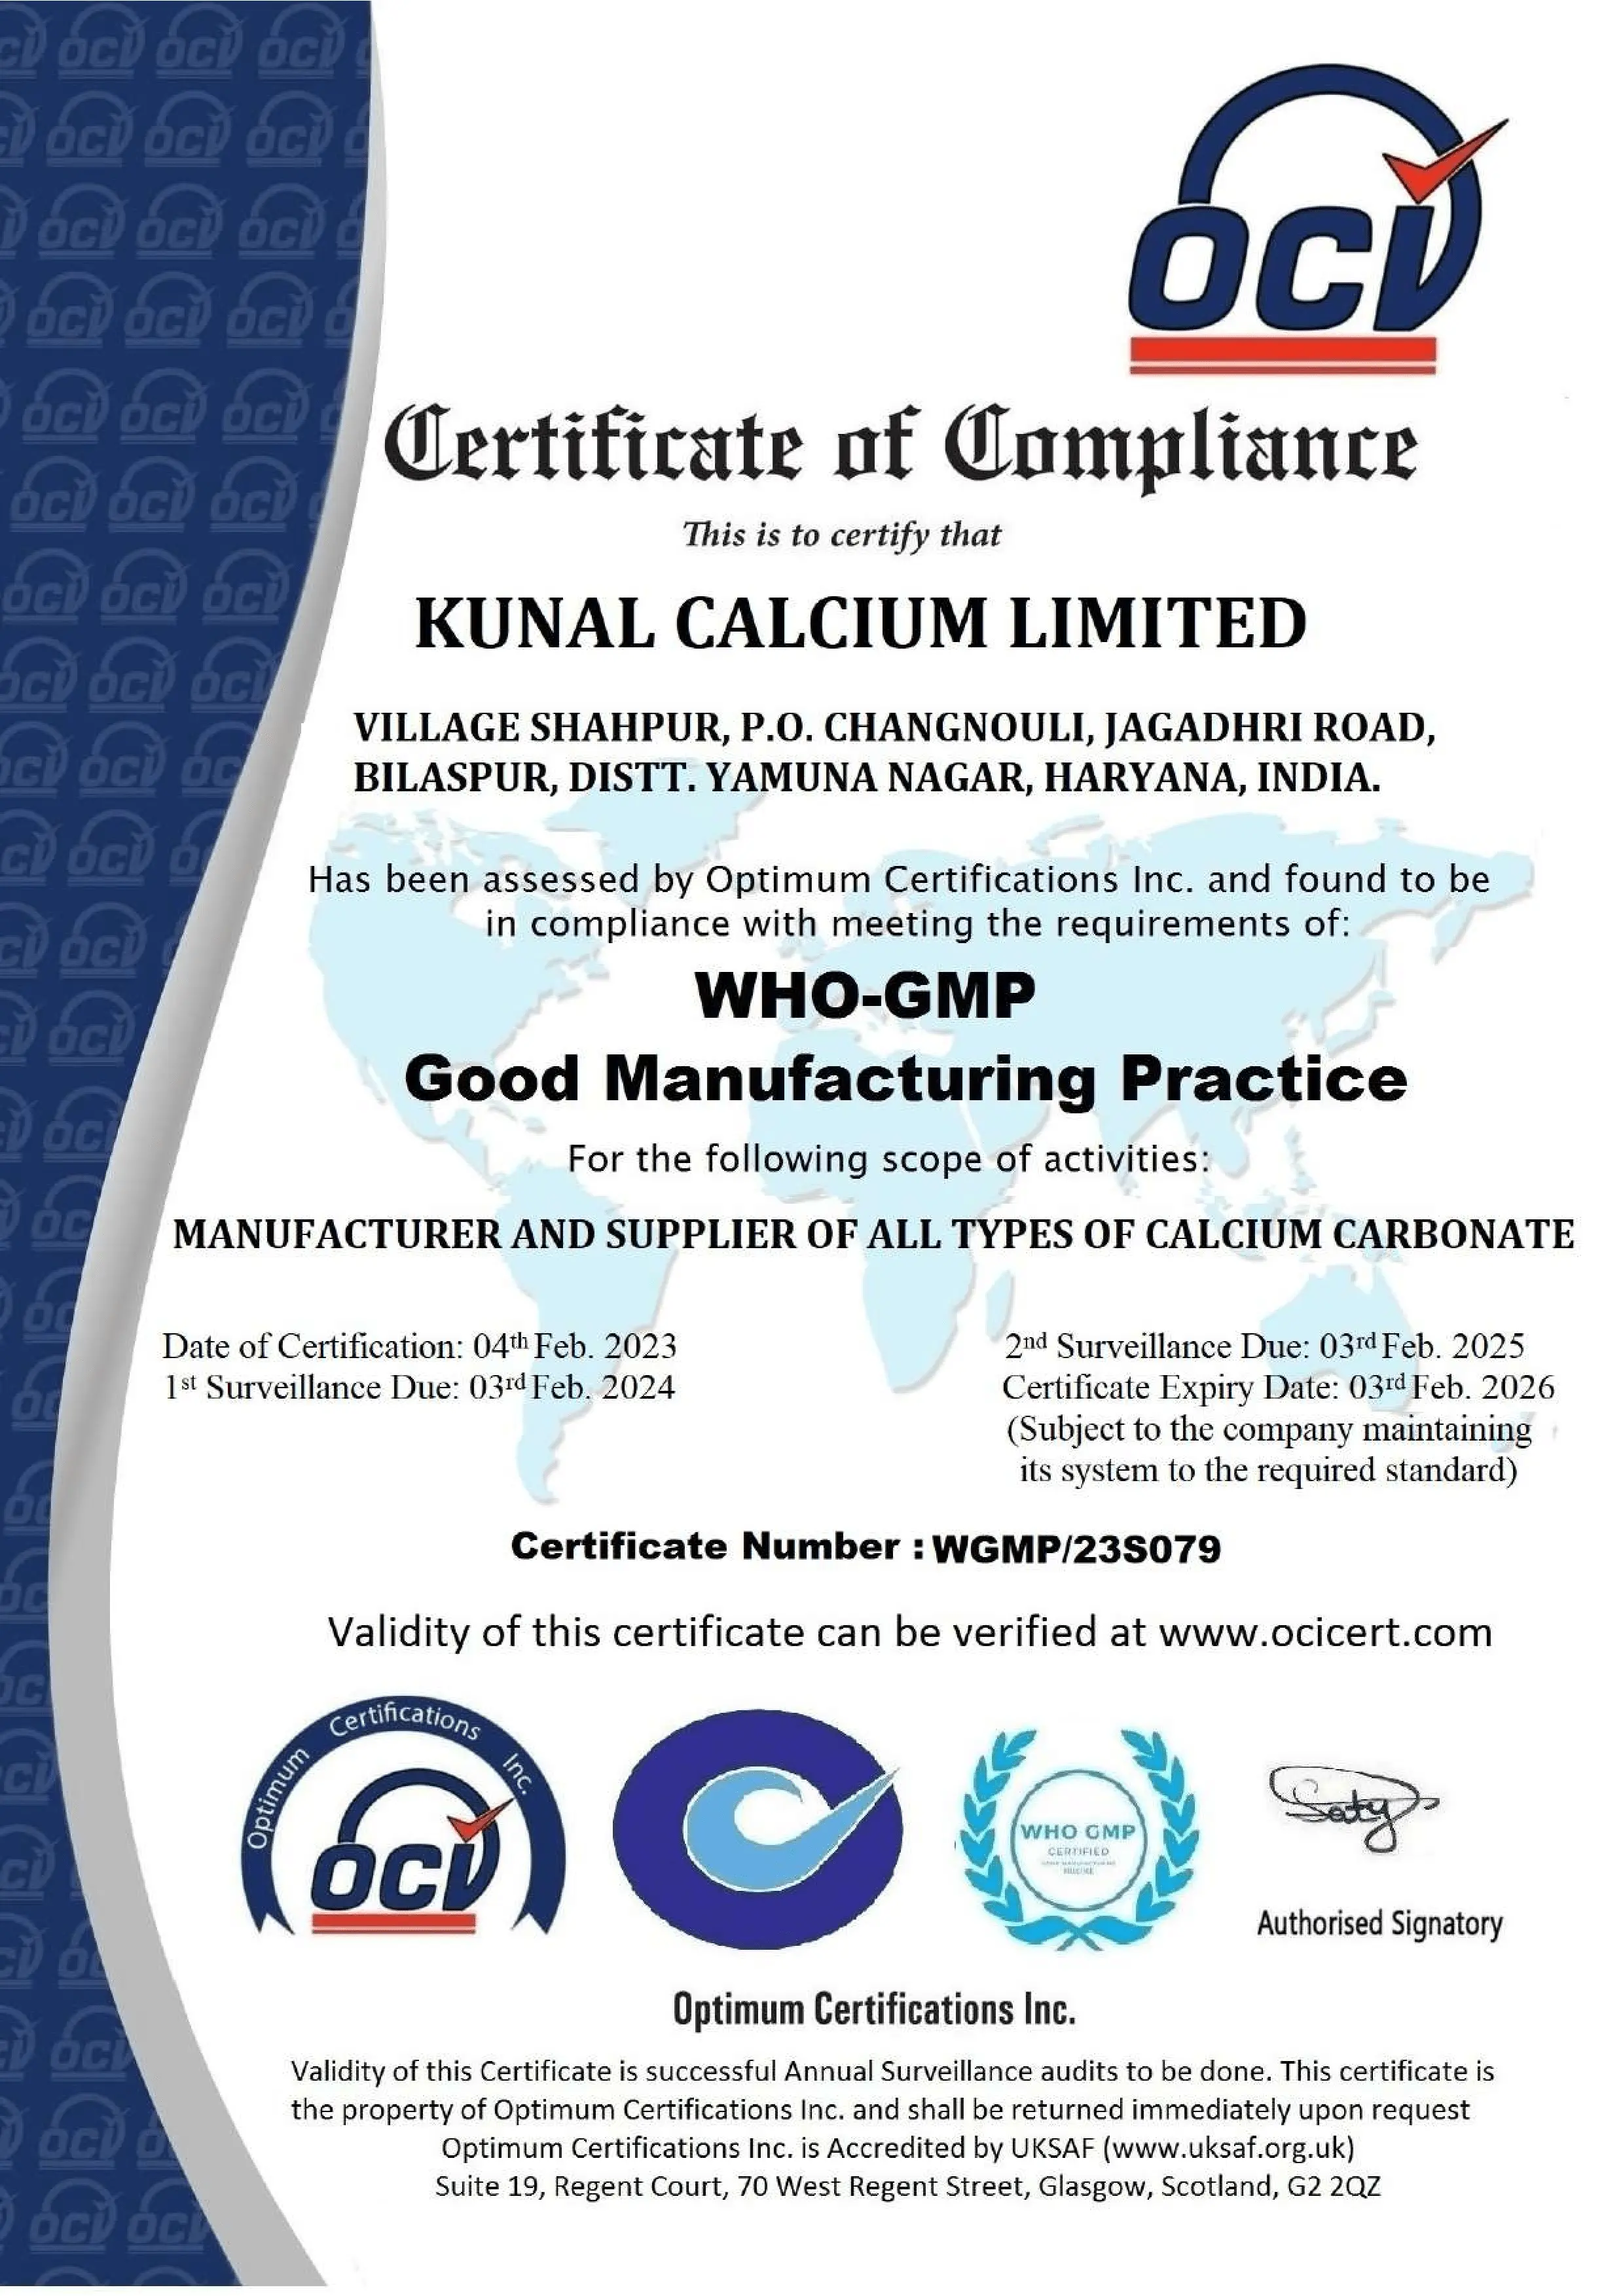 Kunal Calcium ISO WHO-GMP